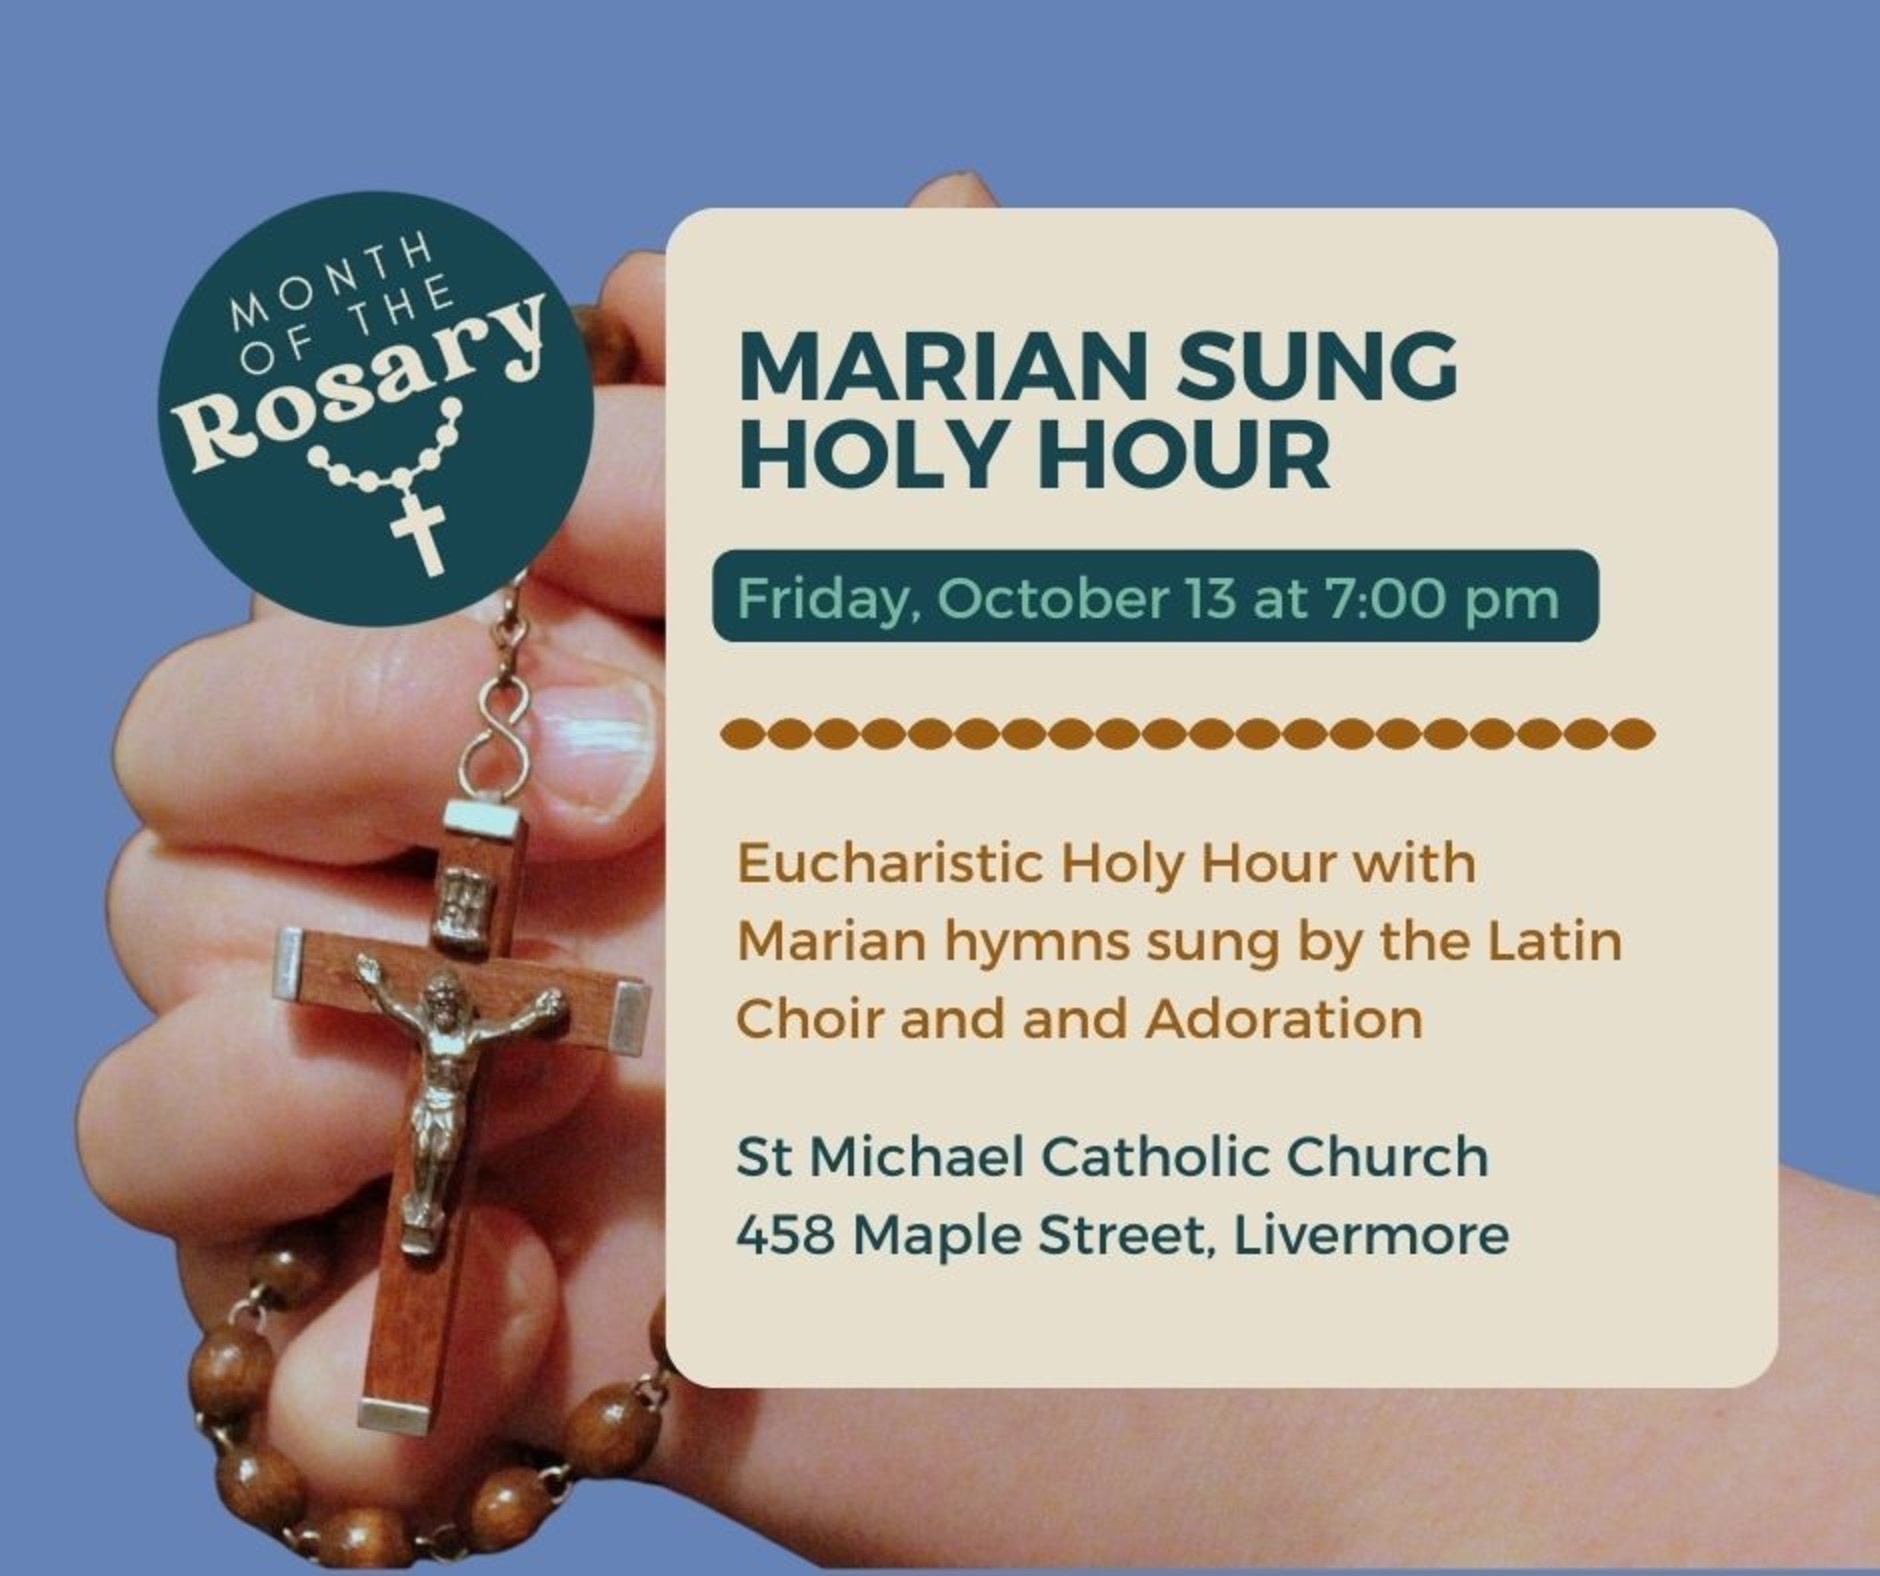 Marian Sung Holy Hour